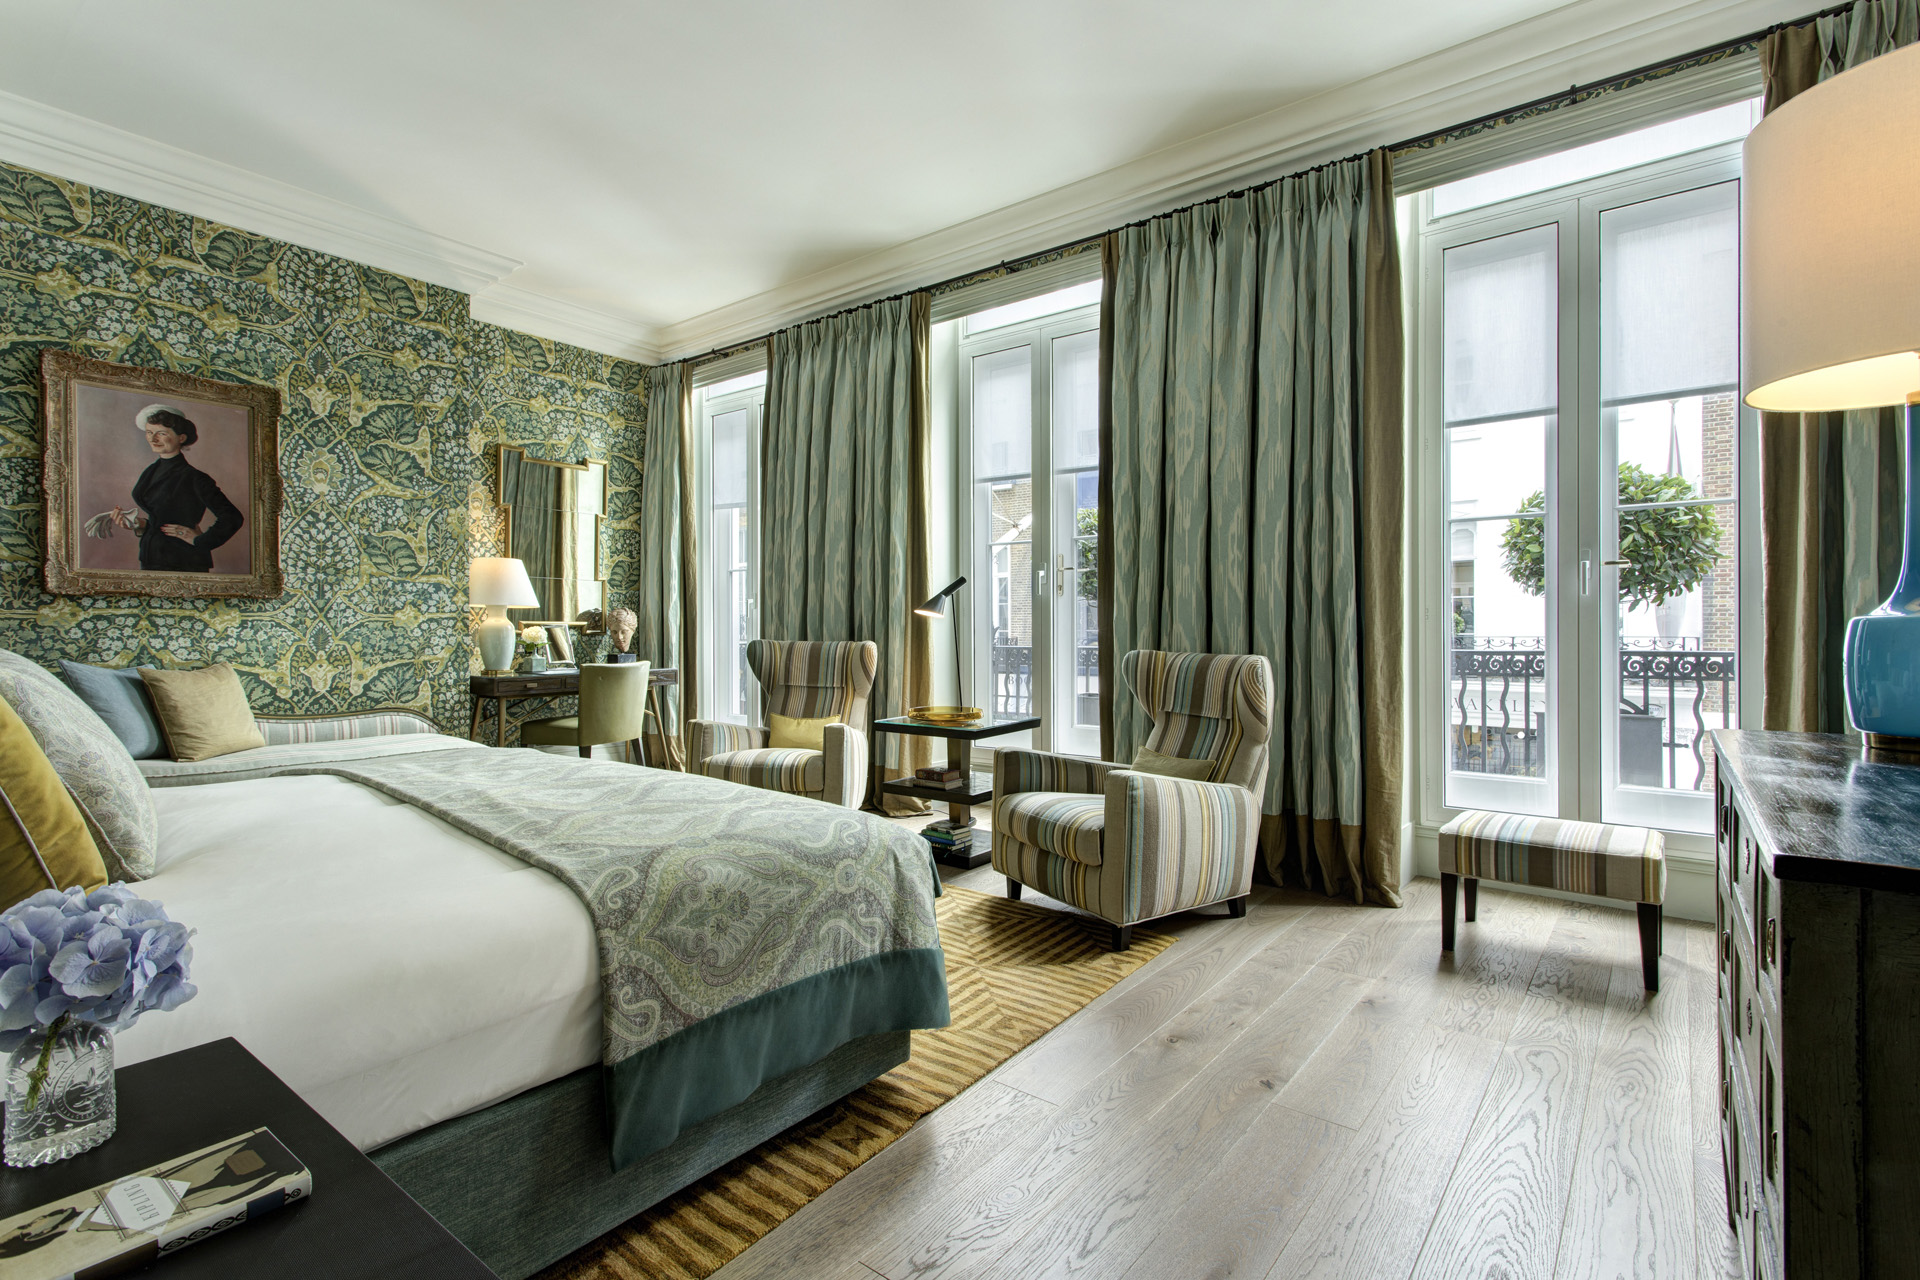 The Kipling Suite with sage green furnishings